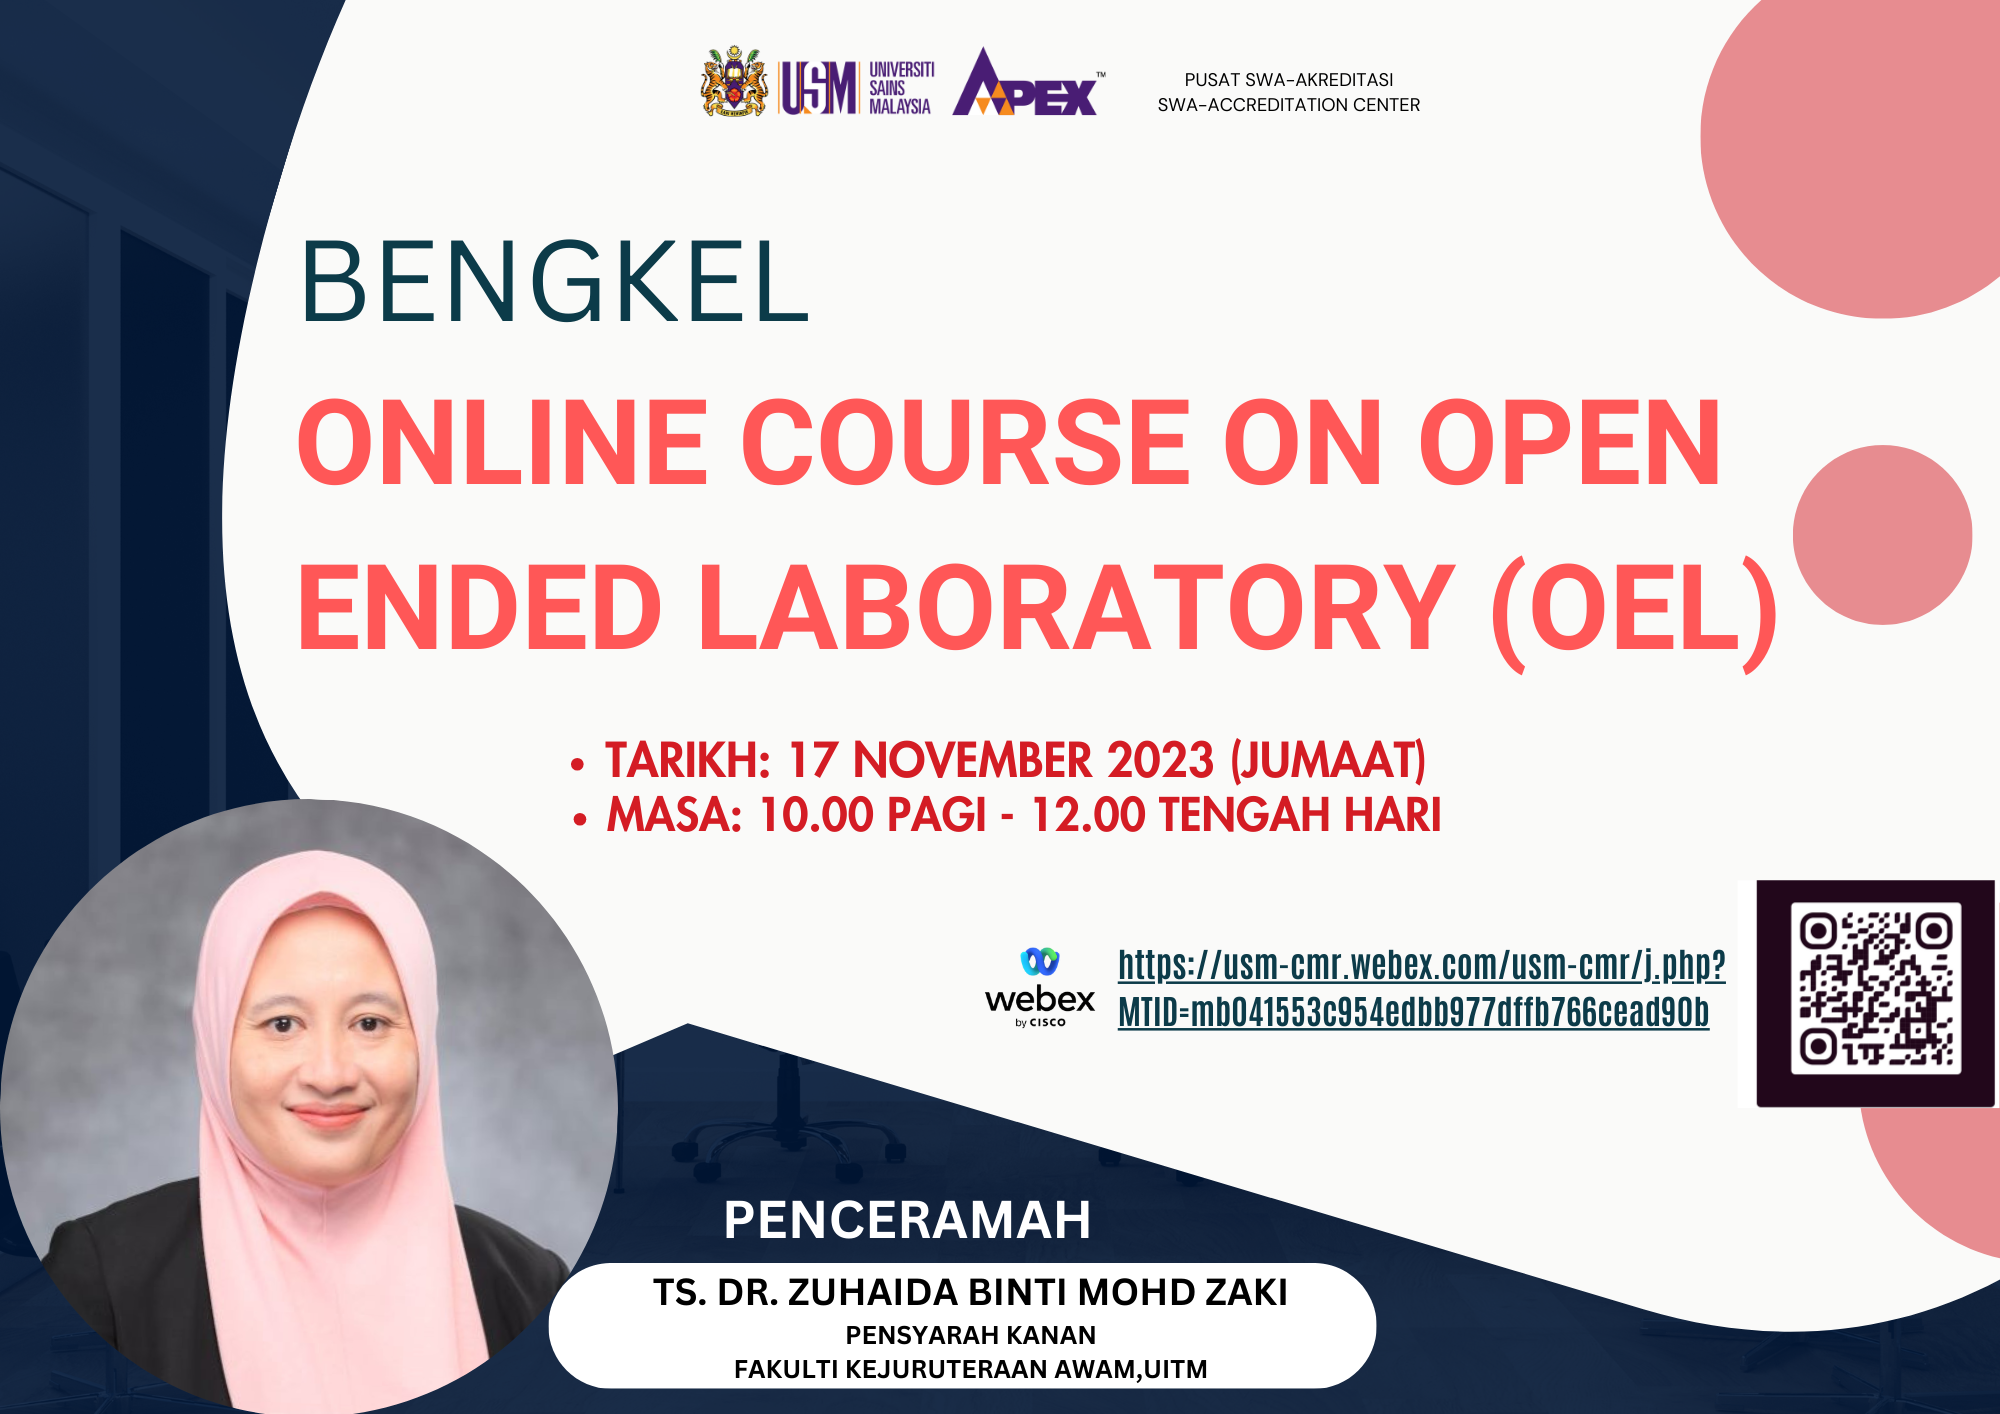 POSTER BENGKEL ONLINE COURSE ON OPEN ENDED LABORATORY OEL 1